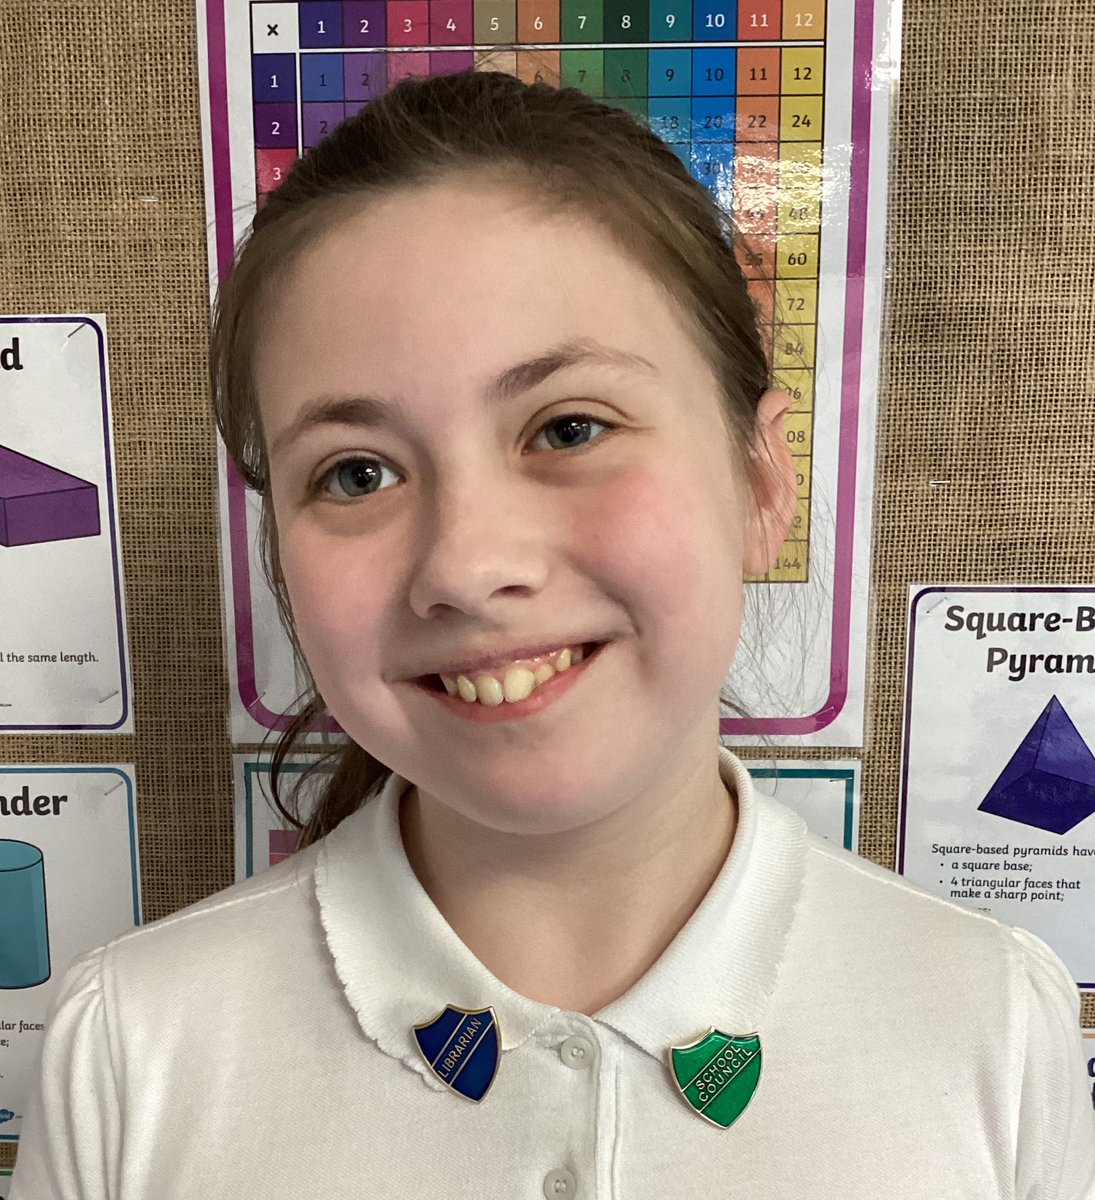 On Friday we gave out badges to our librarians, school council, sports leaders, and play leaders for them to wear with pride. Modelled below with a very smiley face! @TrustVictorious